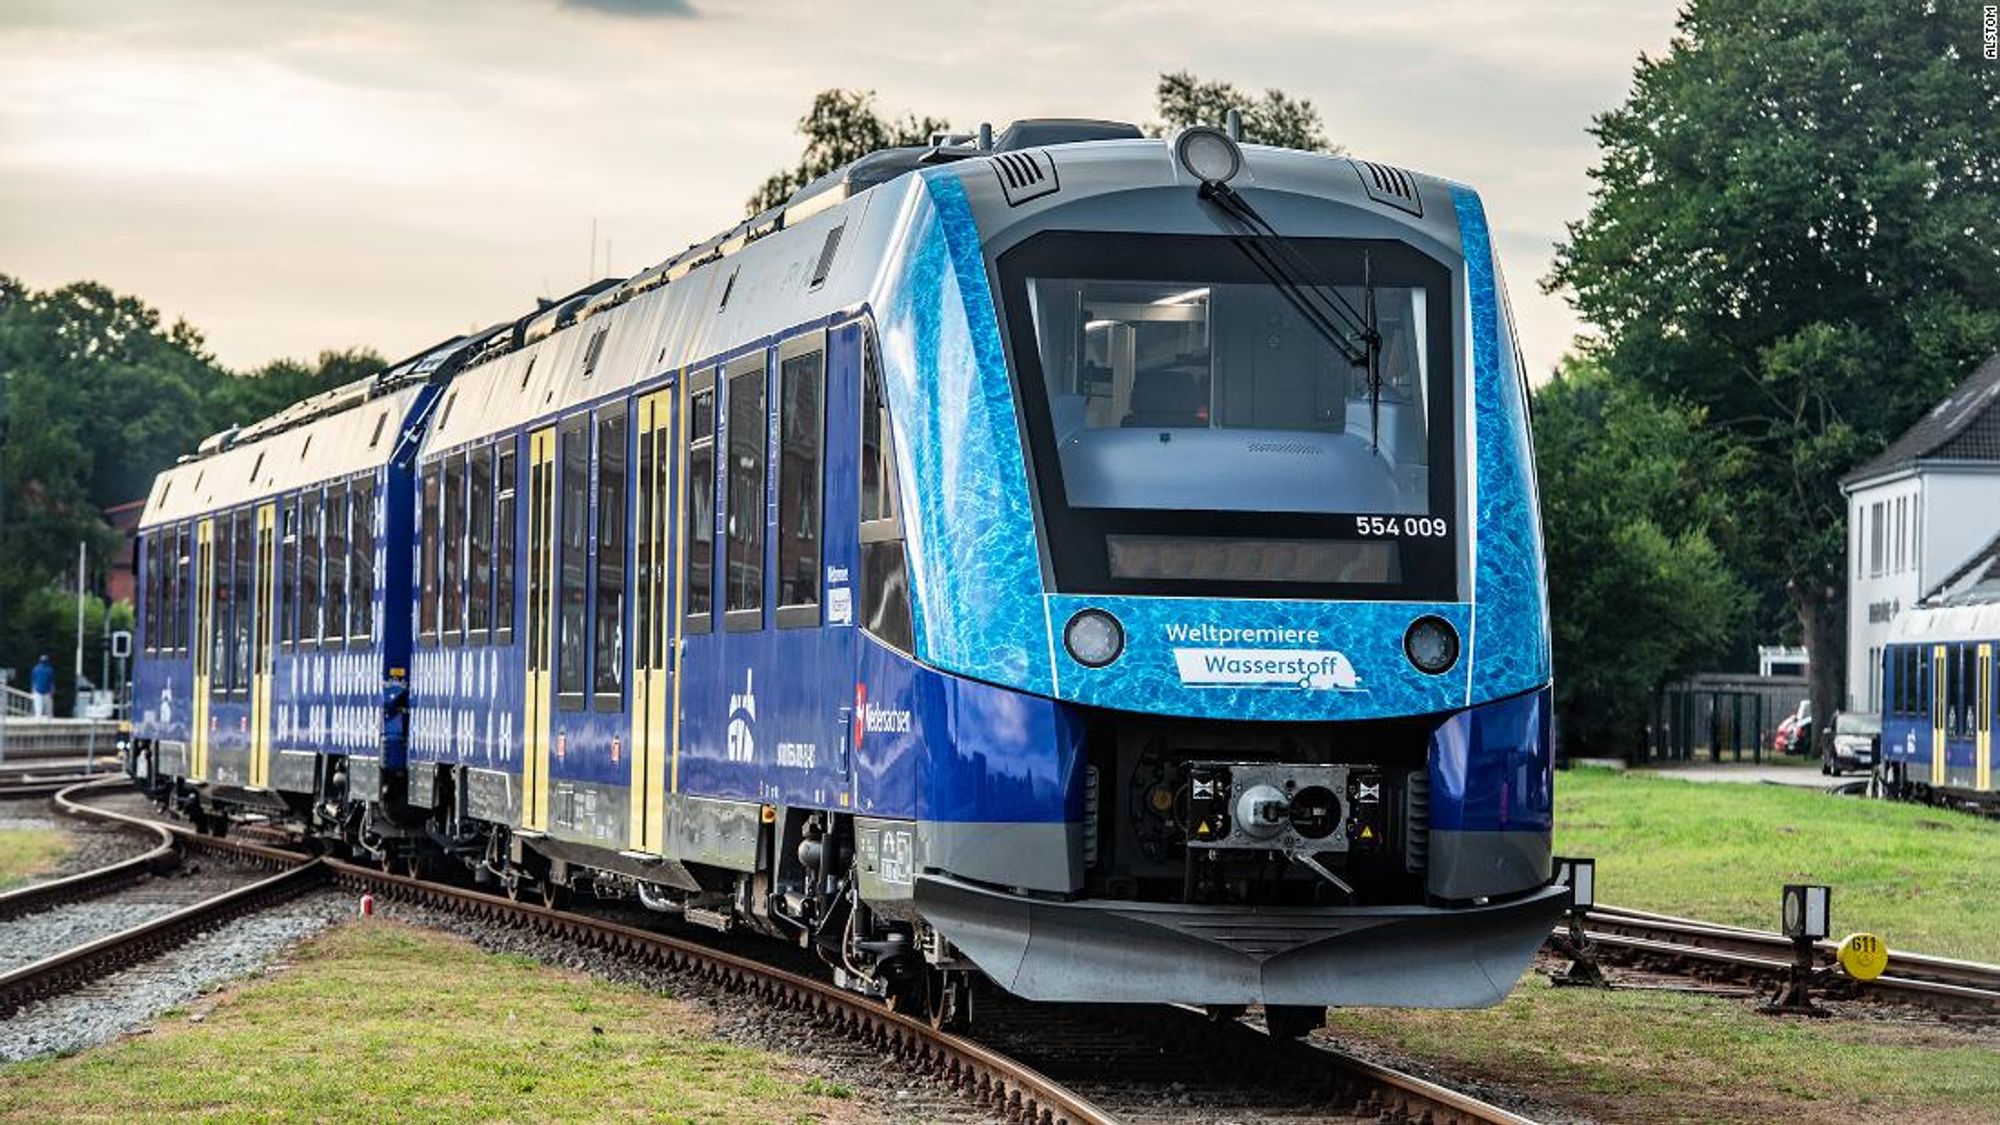 The world's first hydrogen-powered passenger trains are here